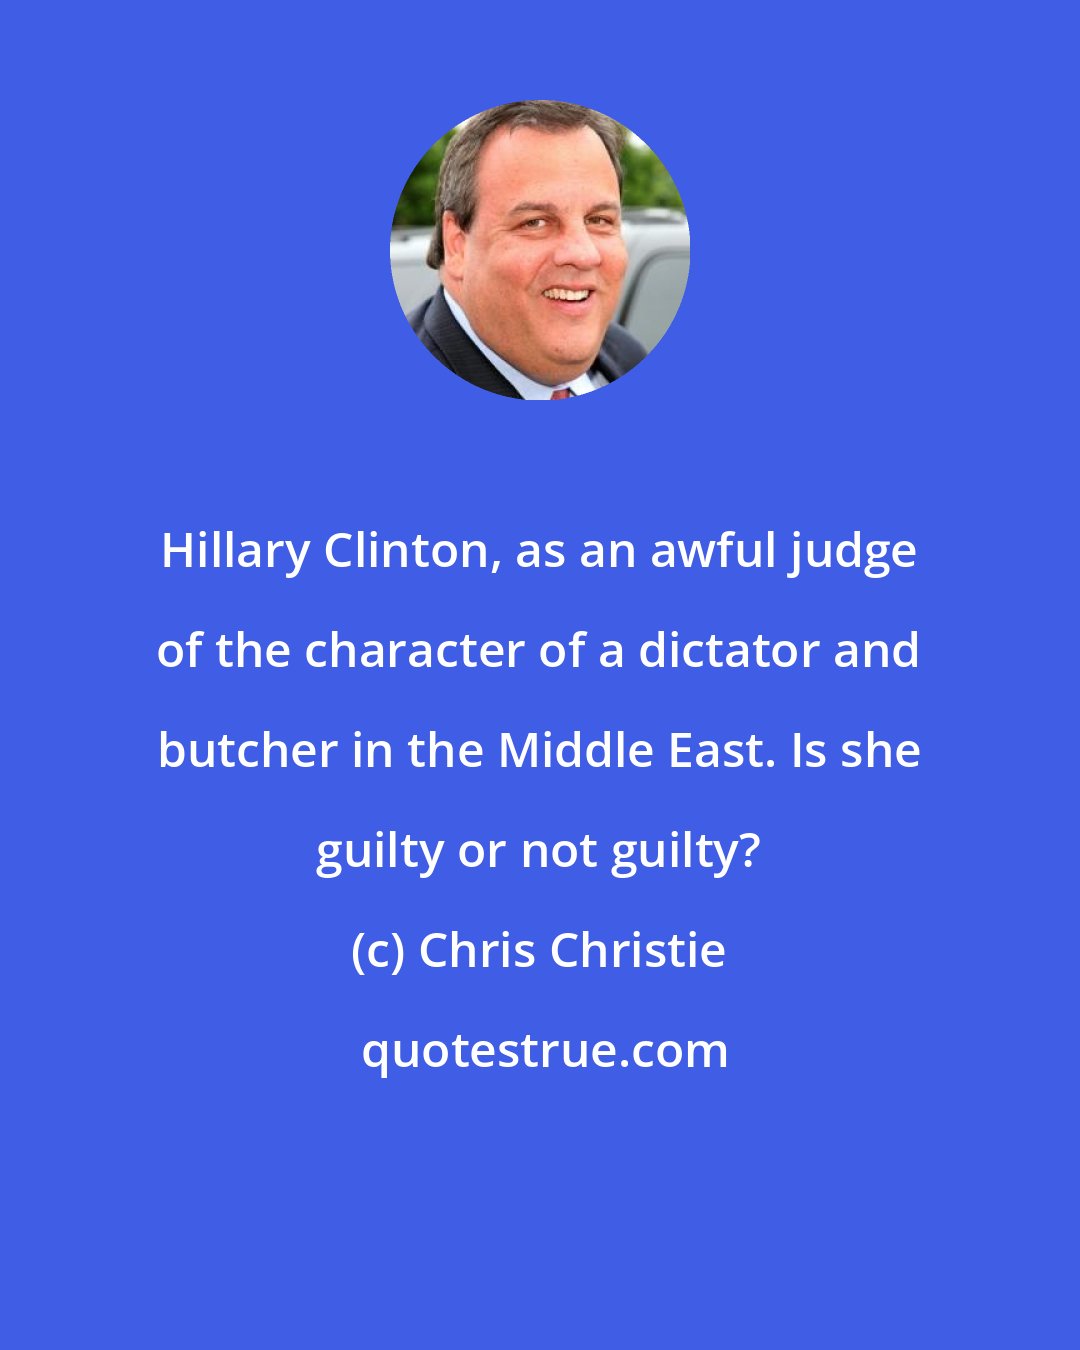 Chris Christie: Hillary Clinton, as an awful judge of the character of a dictator and butcher in the Middle East. Is she guilty or not guilty?